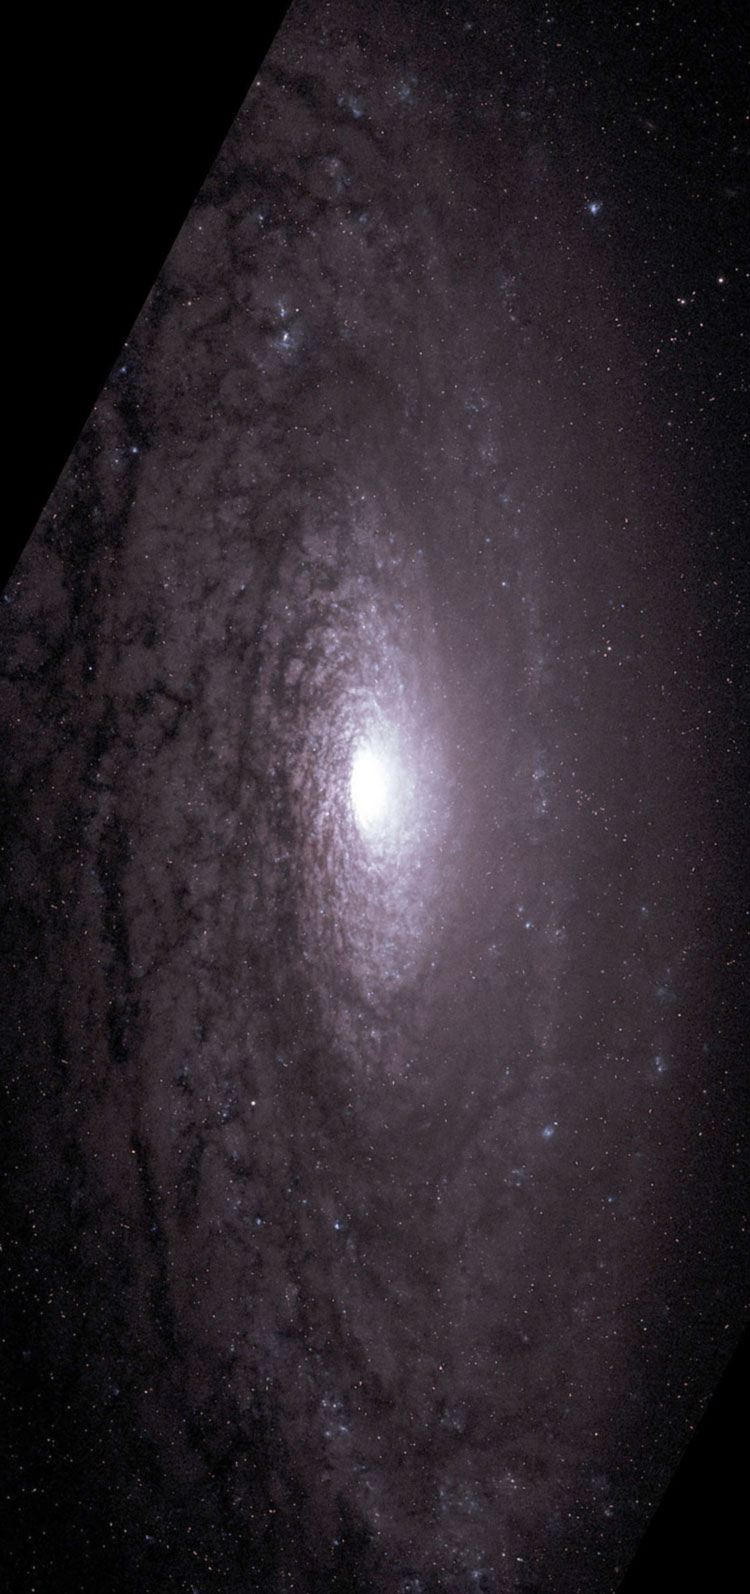 'Raw' HST image of part of spiral galaxy NGC 3675